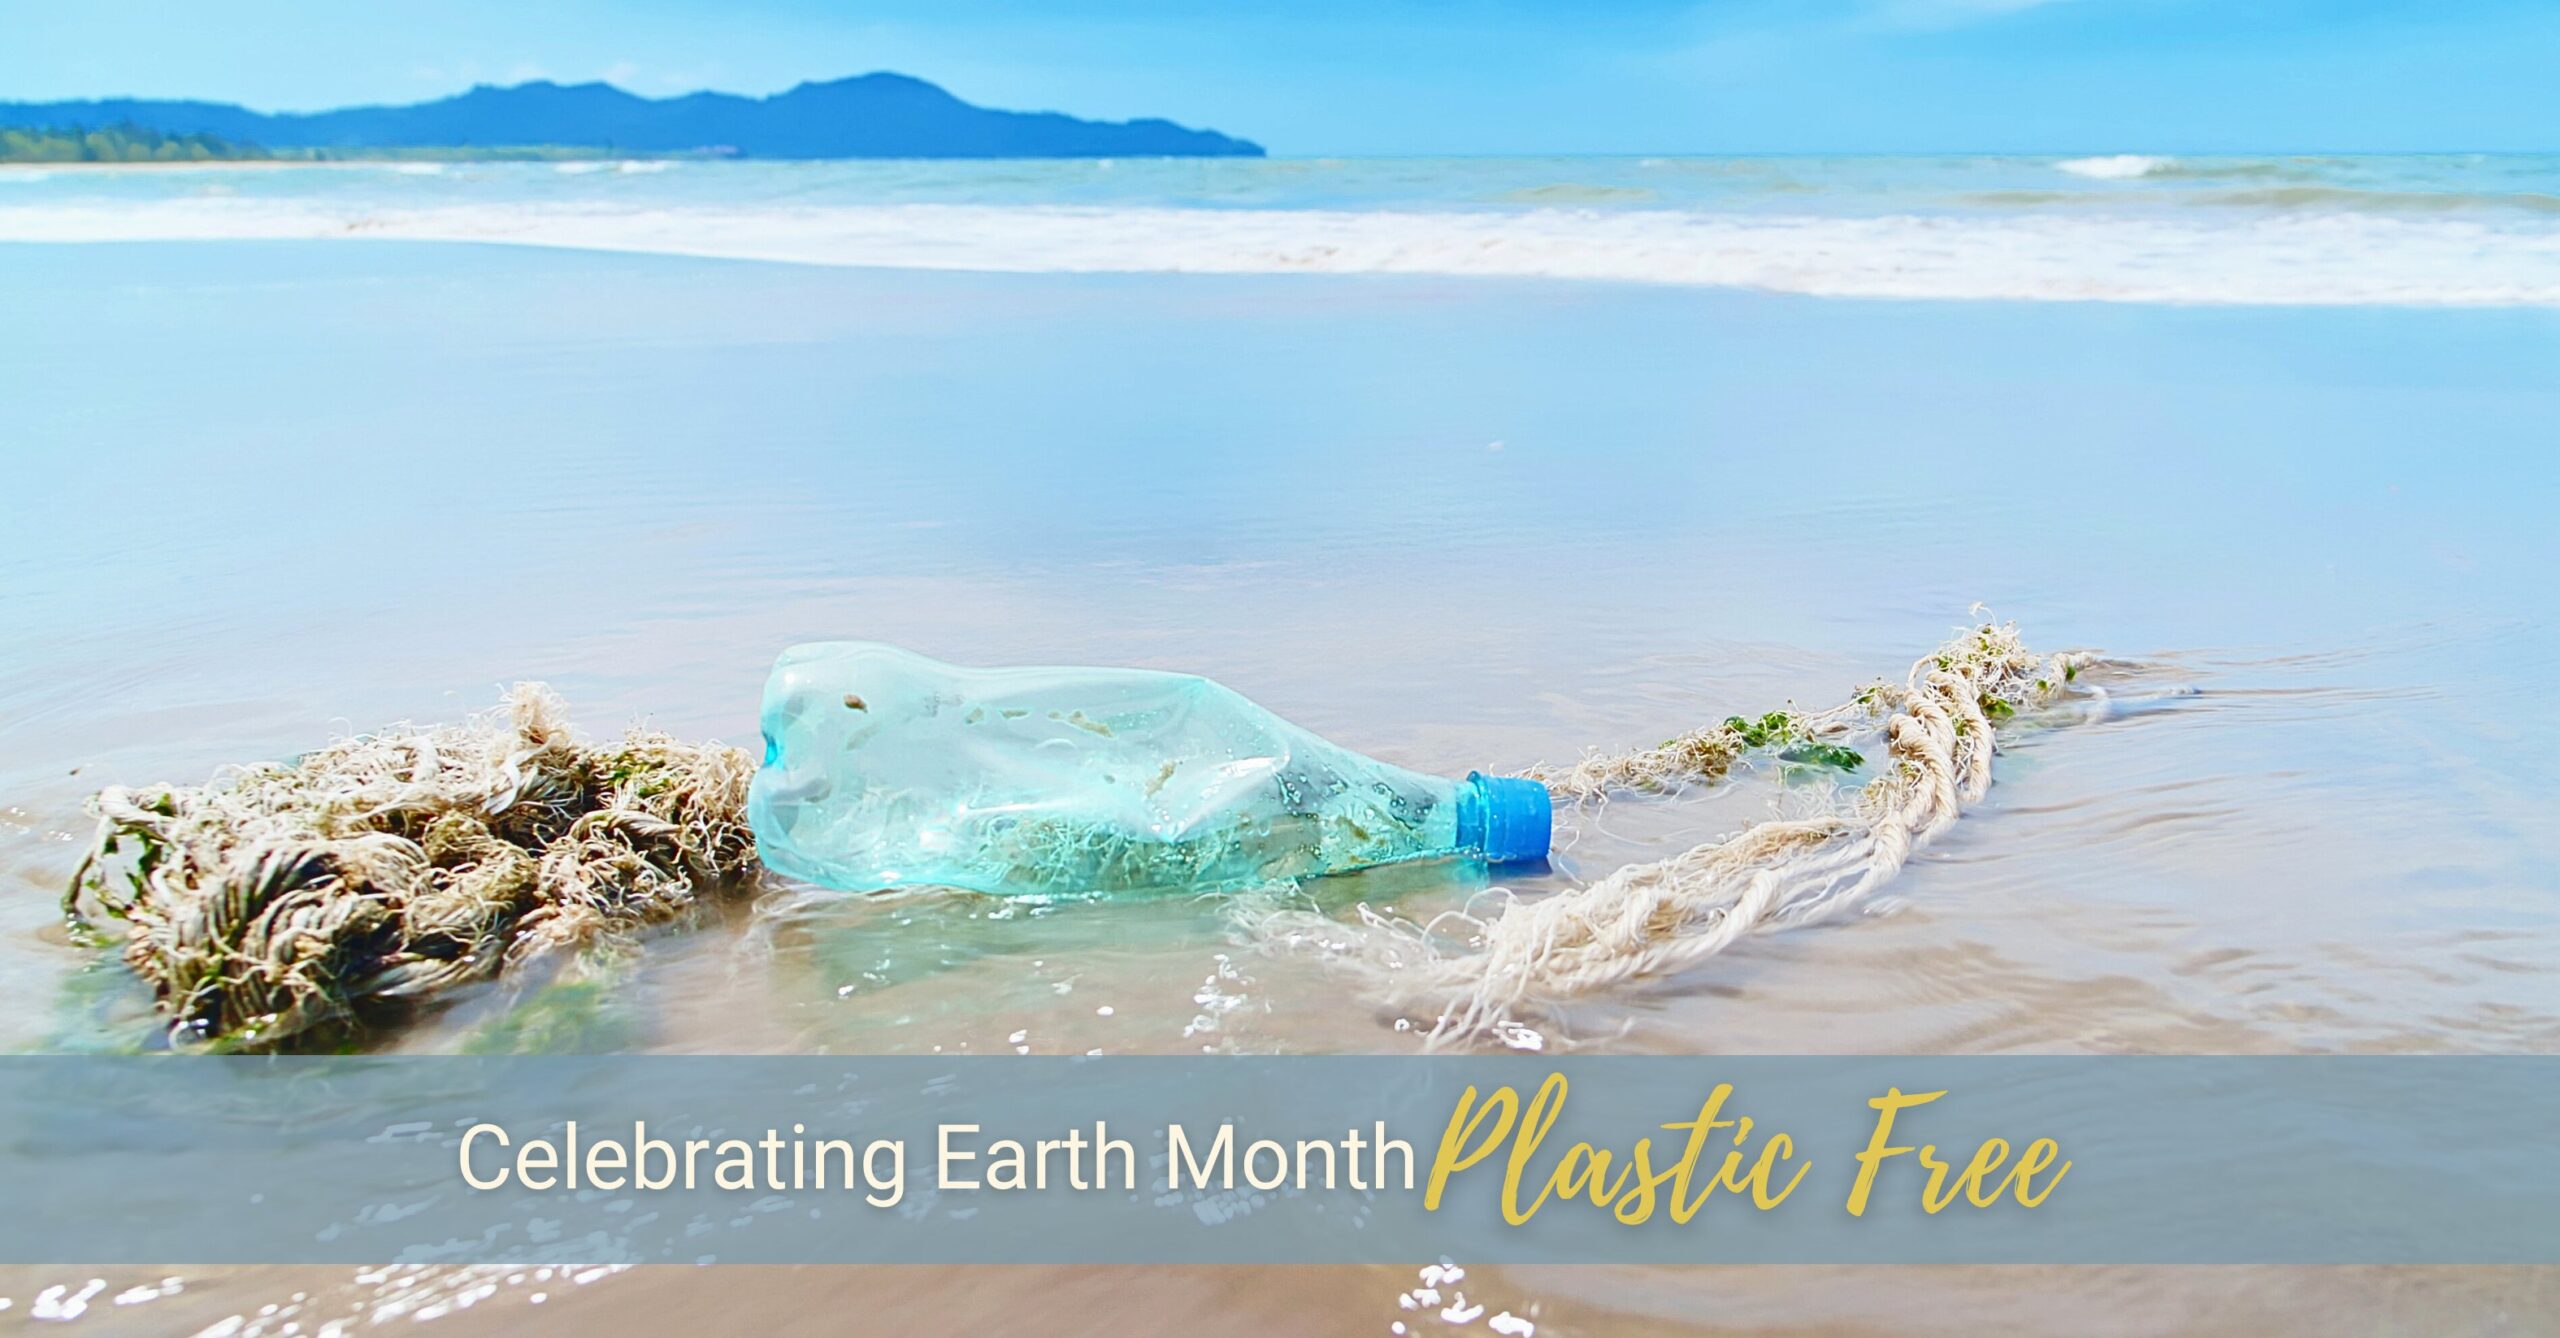 A plastic water bottle pollutes a beautiful beach with the ocean in the background.